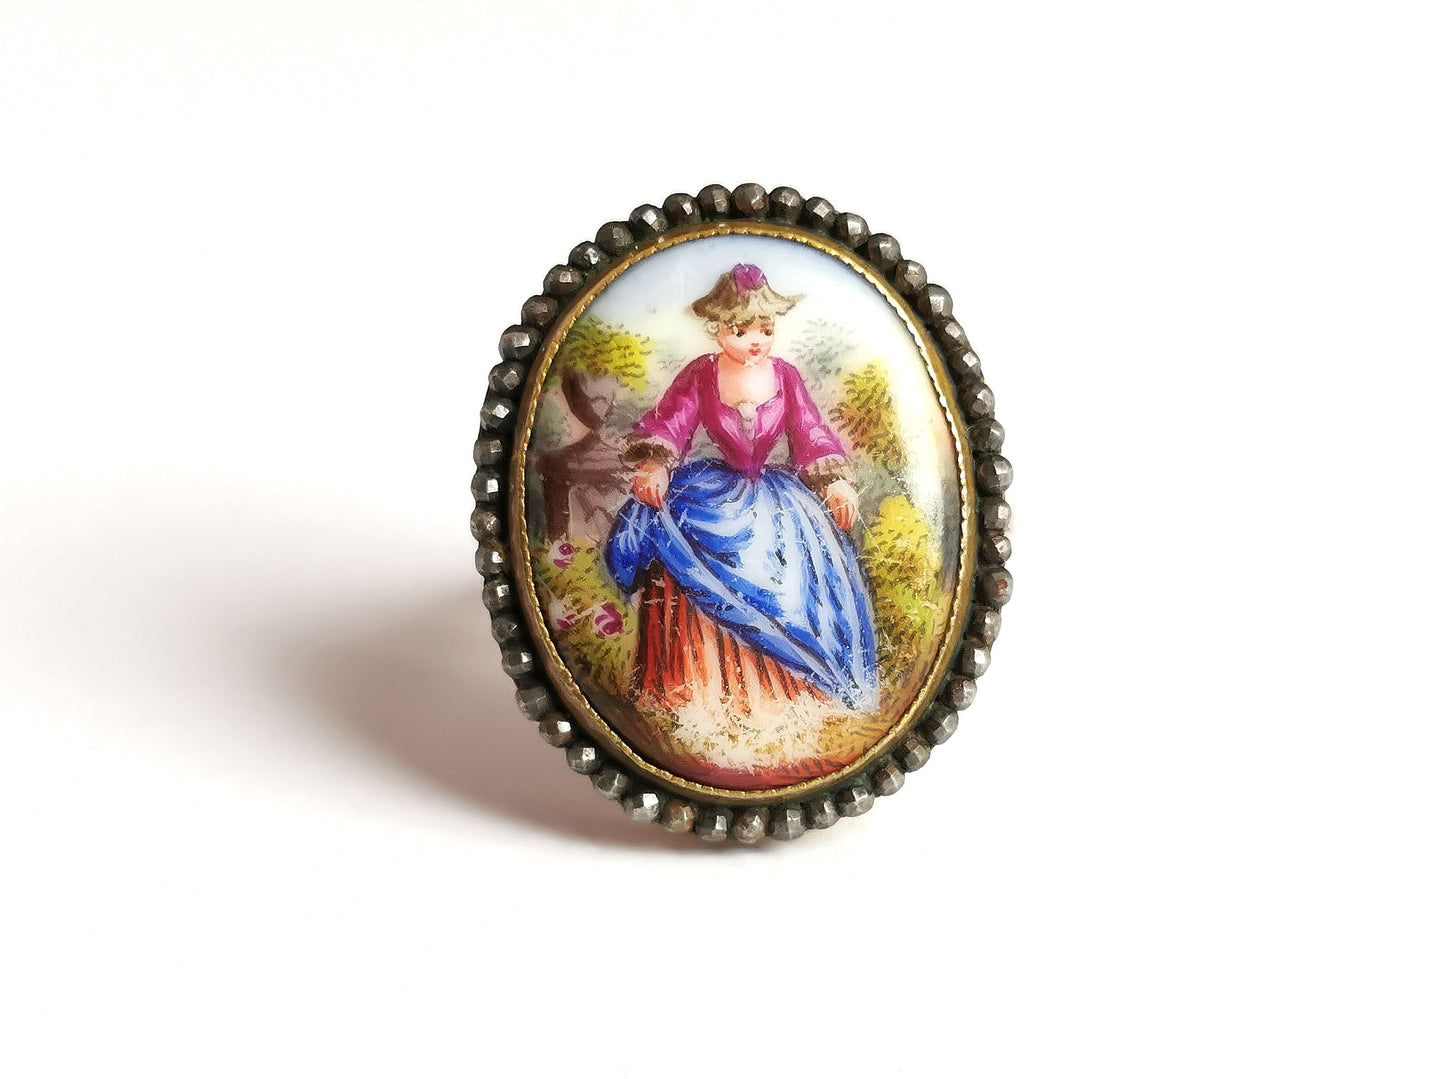 Antique enamelled portrait ring, 9ct gold, Cut steel, Mother of pearl